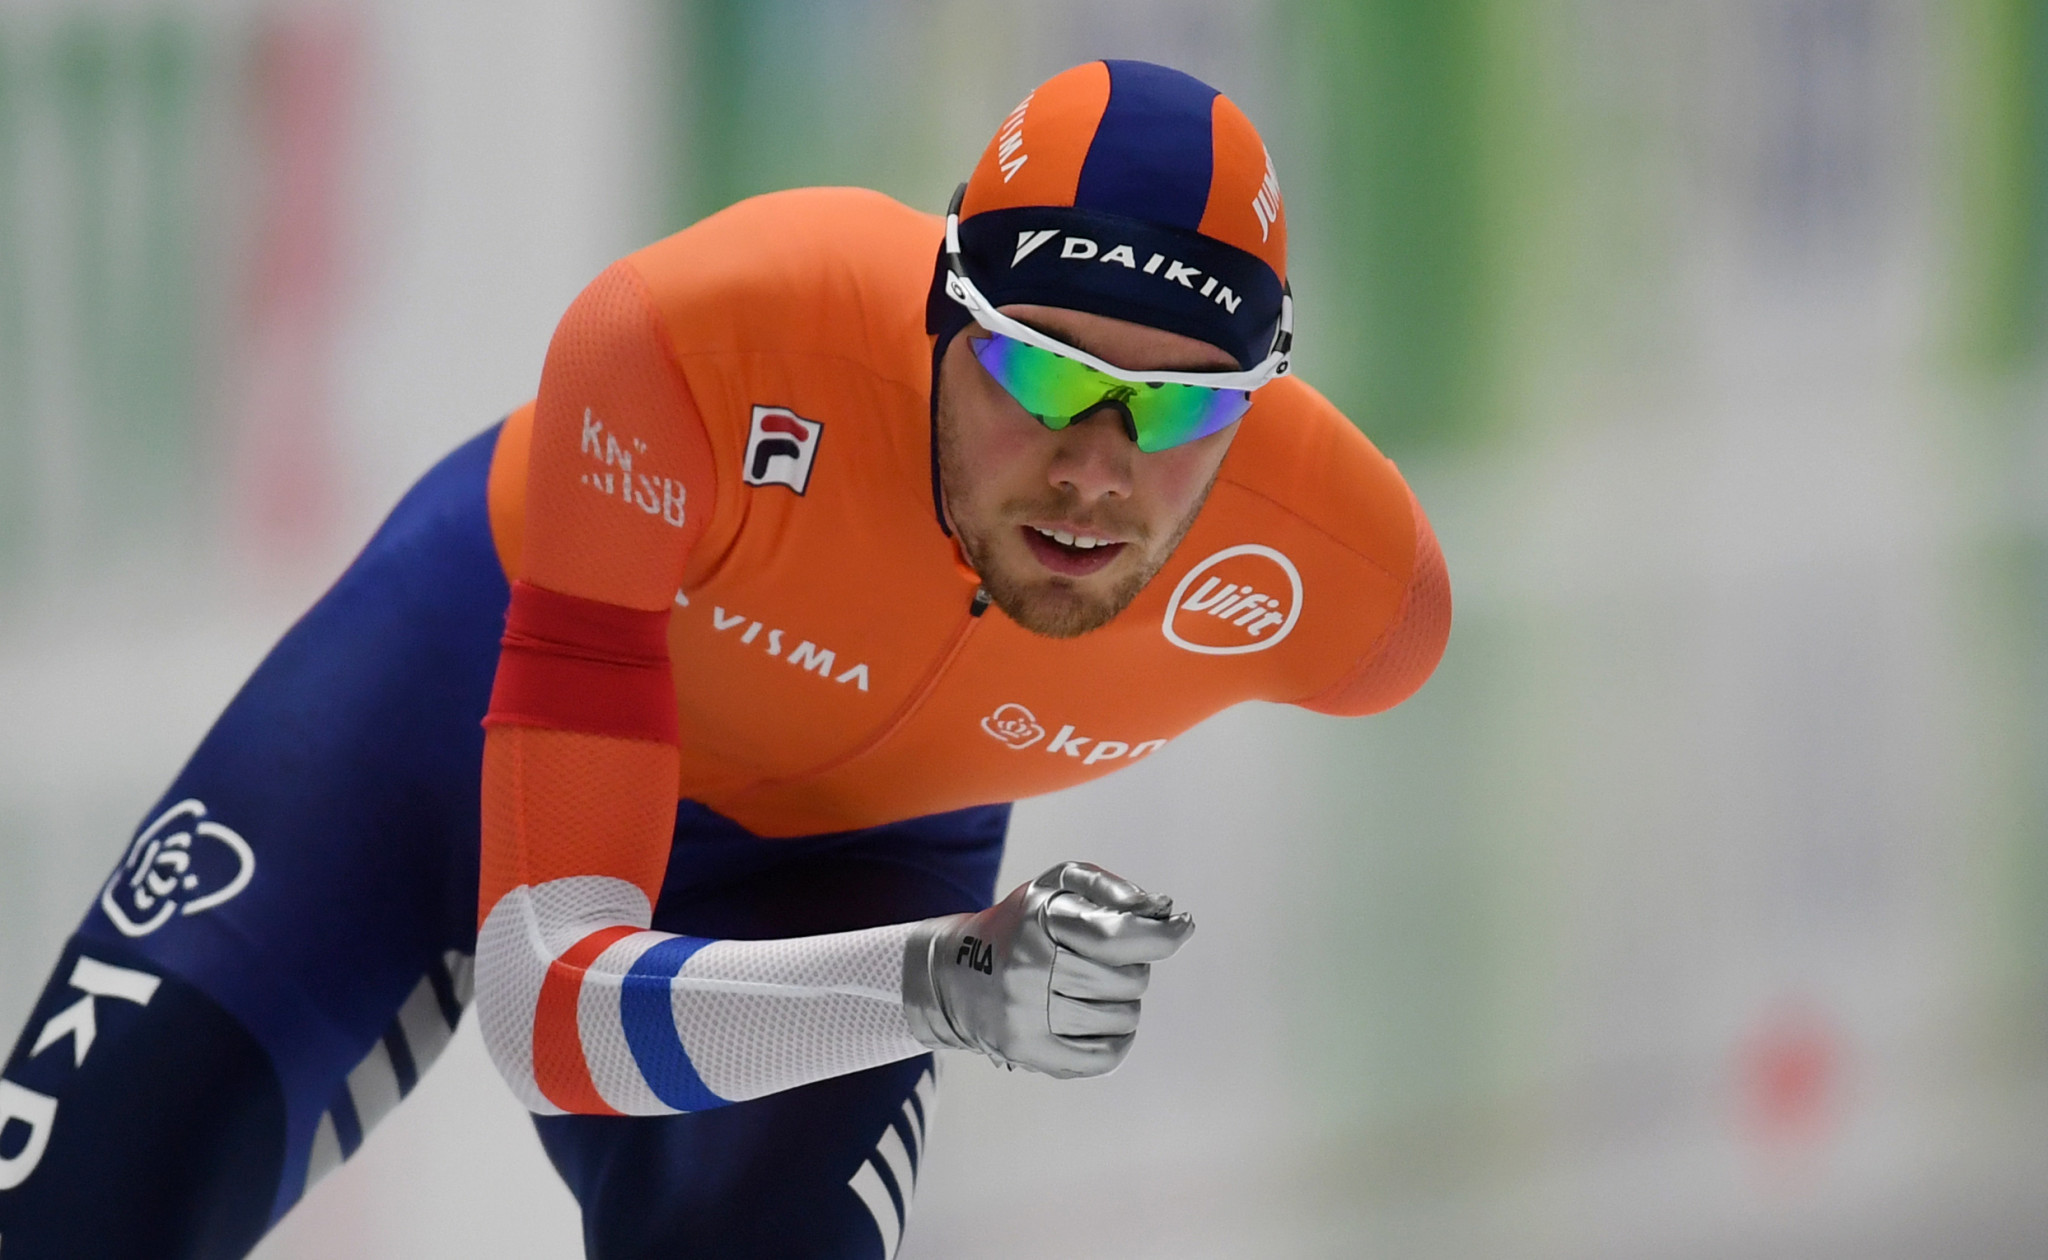 Dutch delight on opening day of ISU Speed Skating World Cup in Minsk